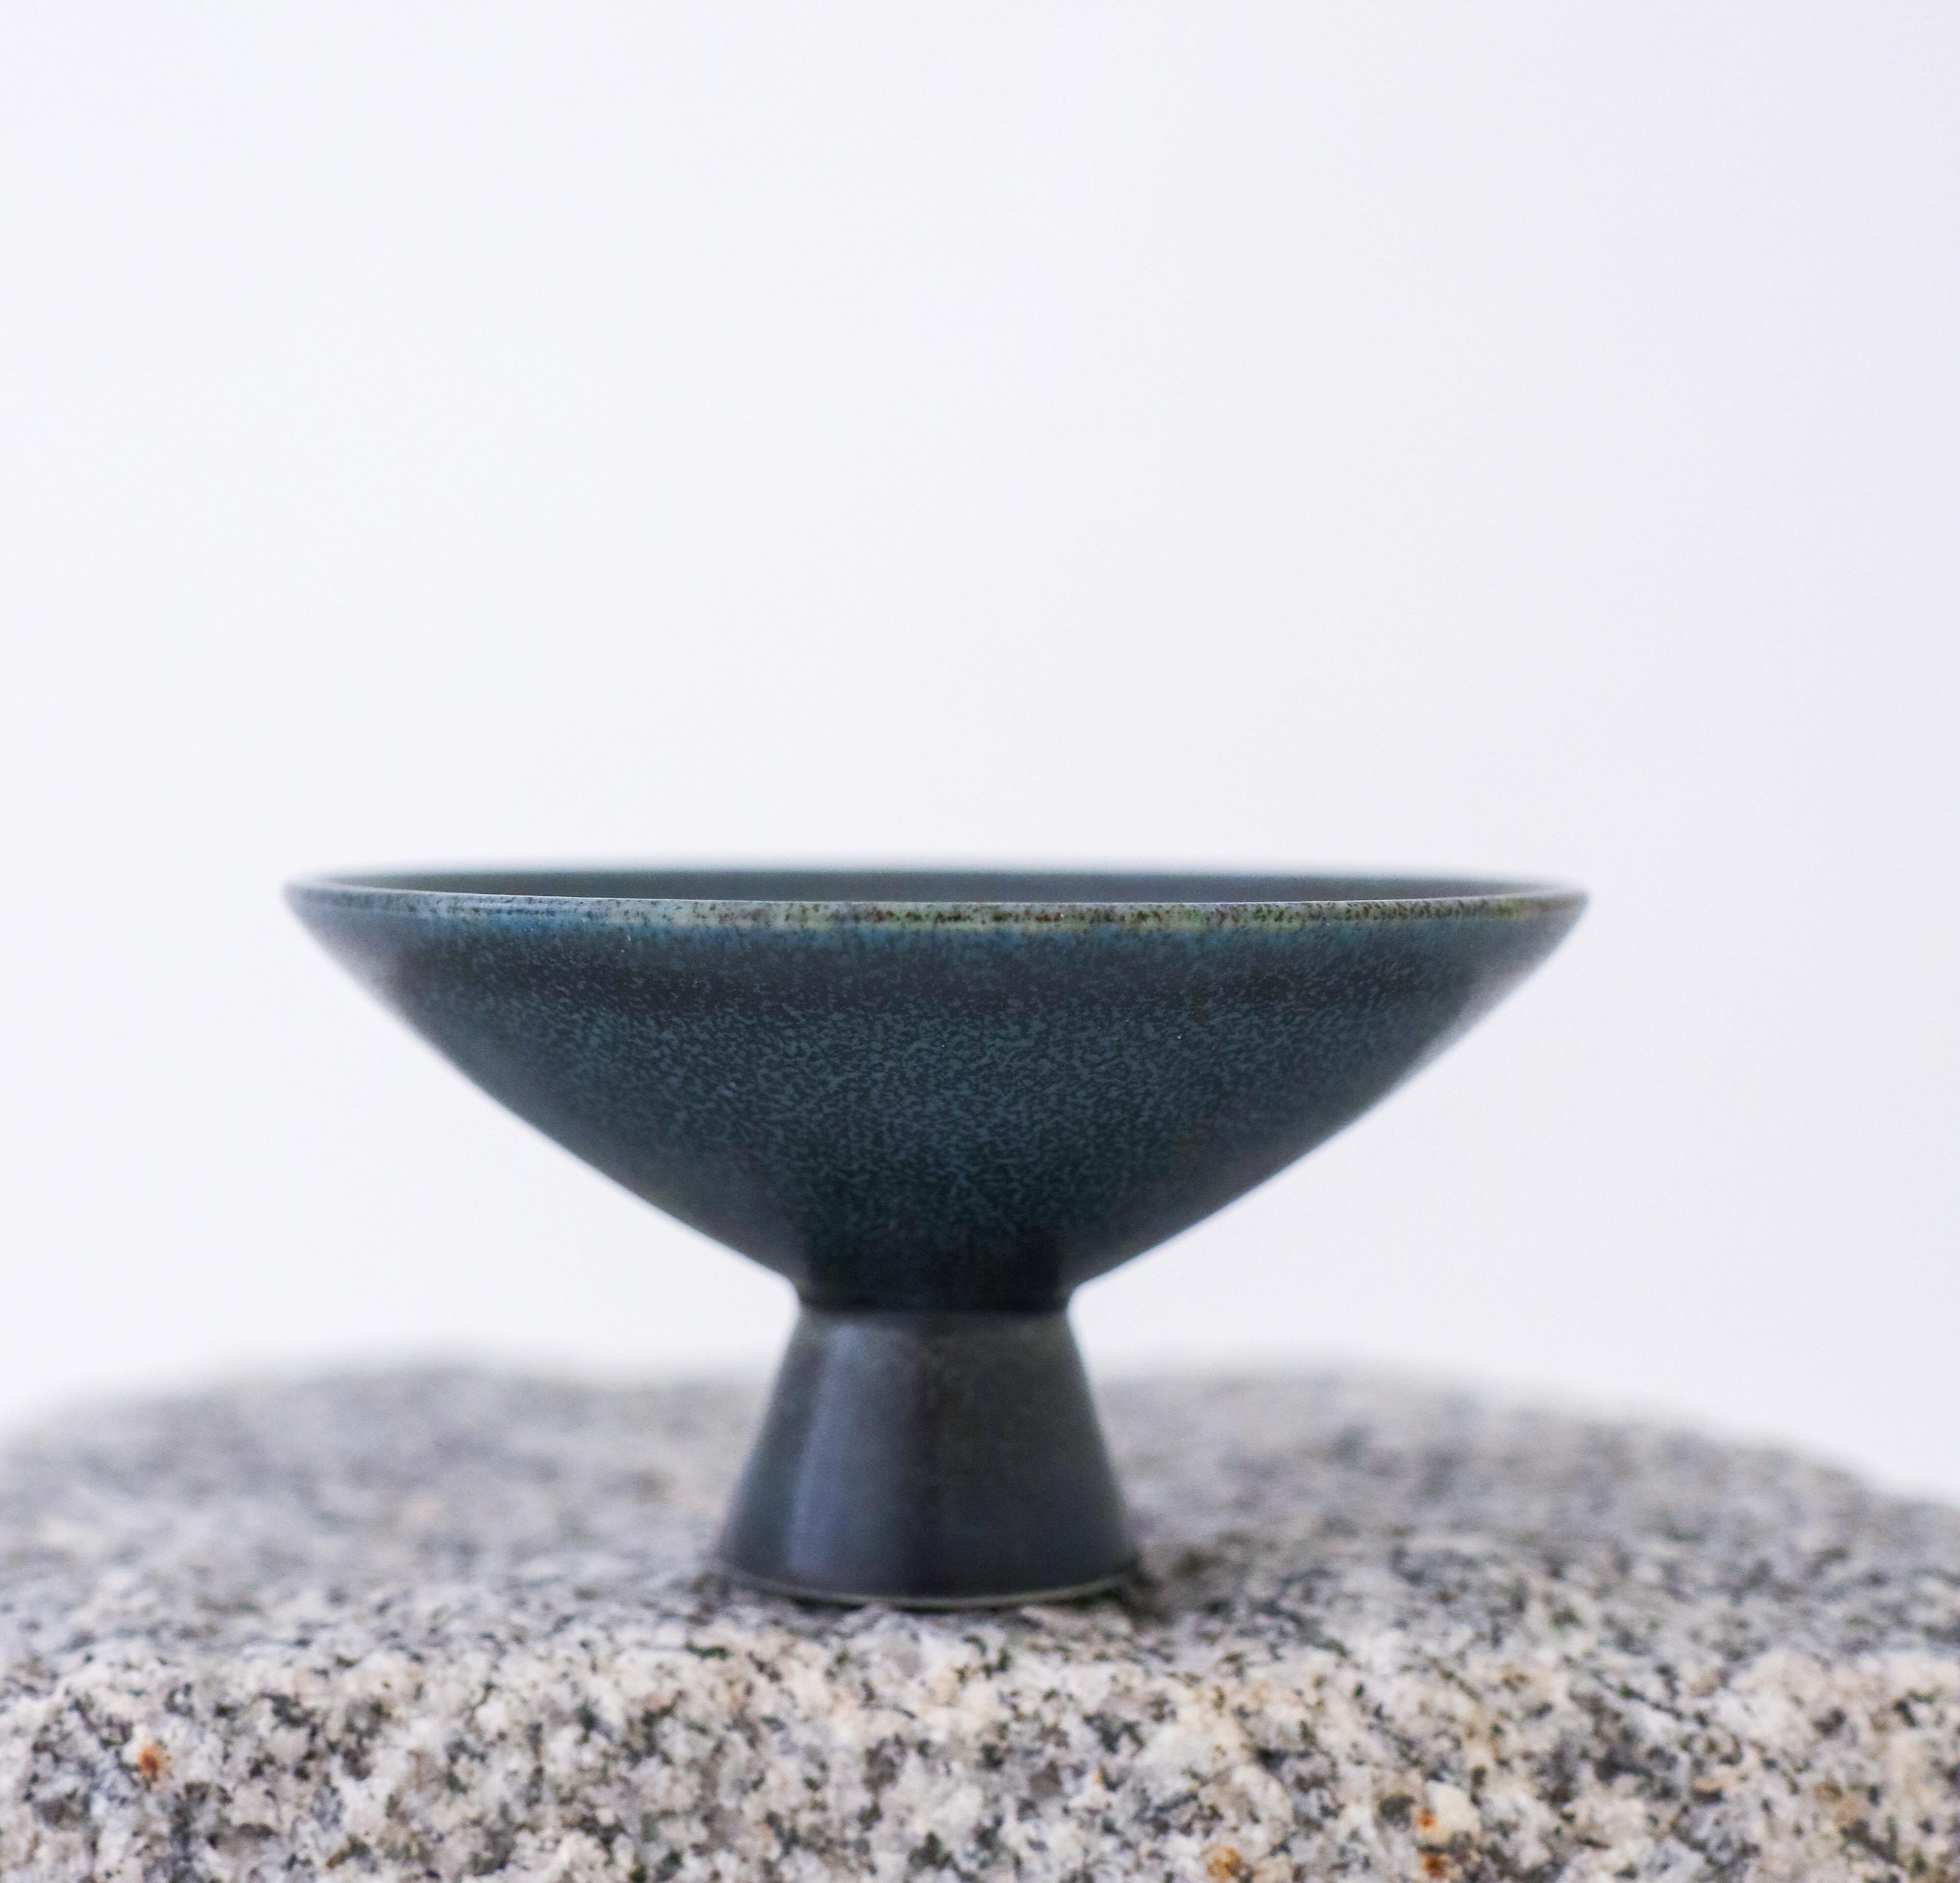 A miniature bowl designed by Gunnar Nylund at Rörstrand, the bowl is 4,5 cm (1.8